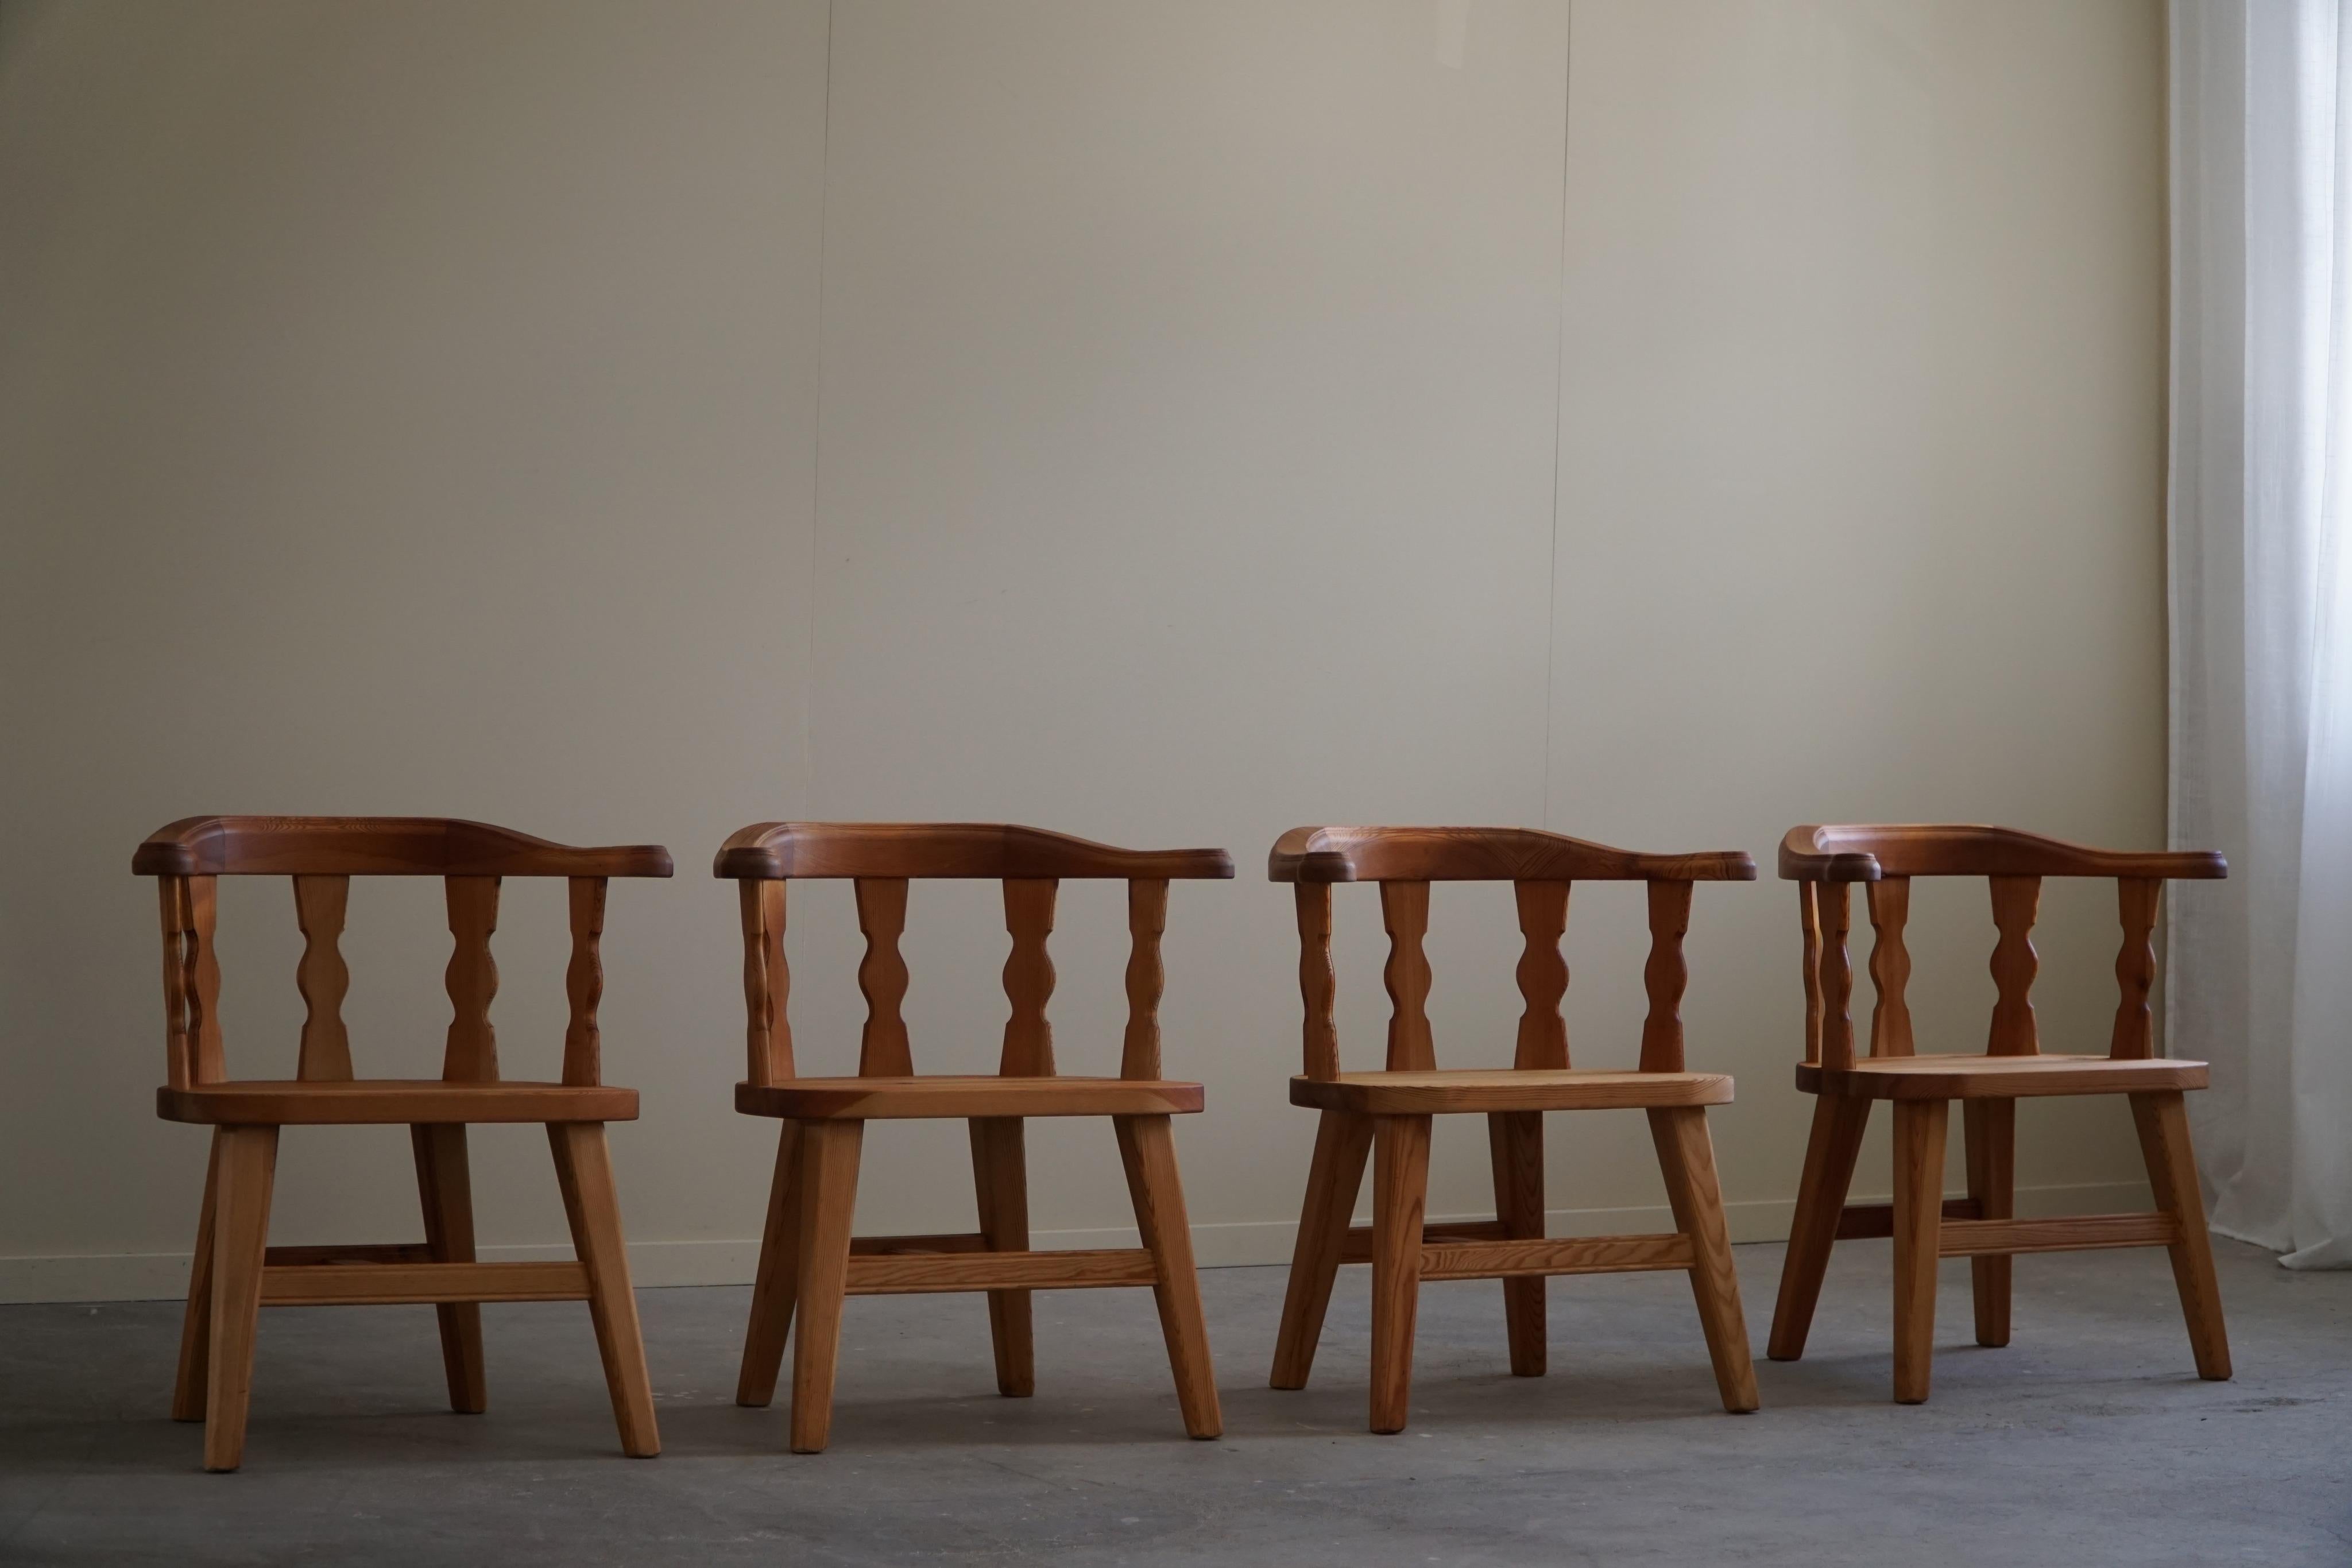 Set of 4 Norwegian Modern Armchairs by Krogenæs, Solid Pine, 1950s For Sale 14